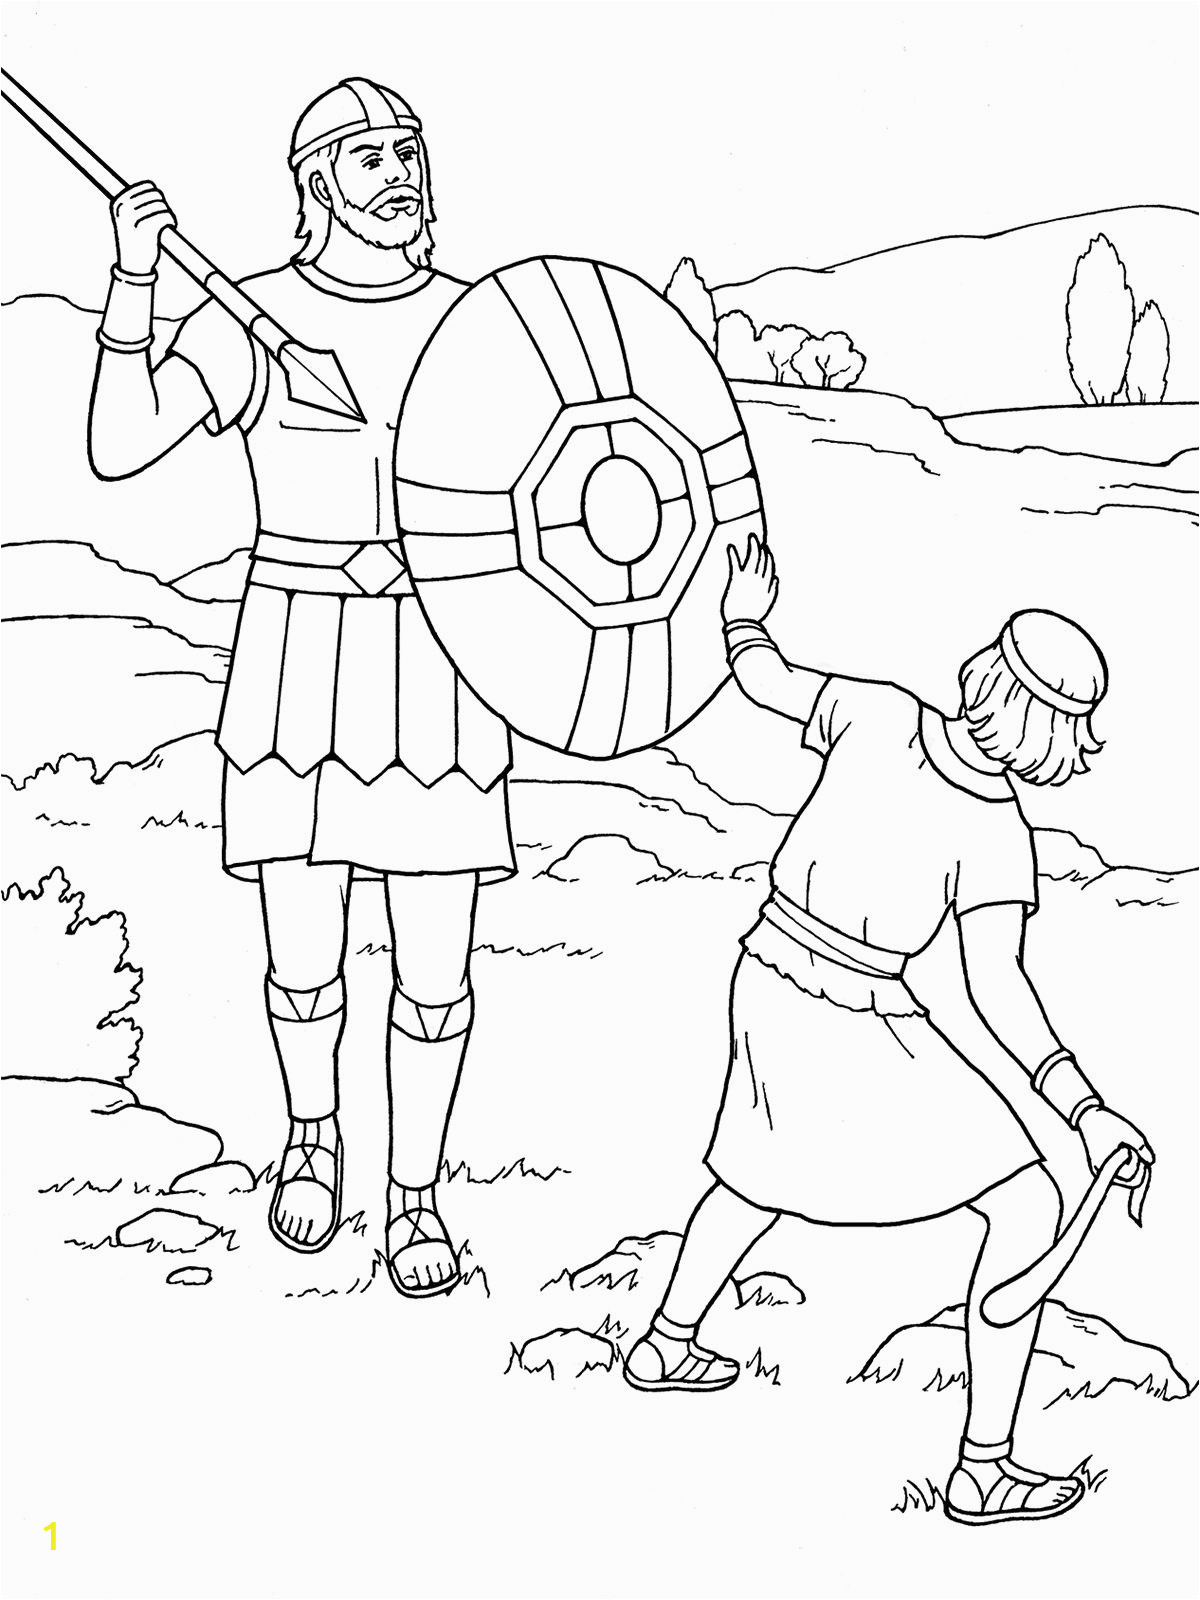 David and Goliath Printable Coloring Pages David and Goliath Coloring Pages